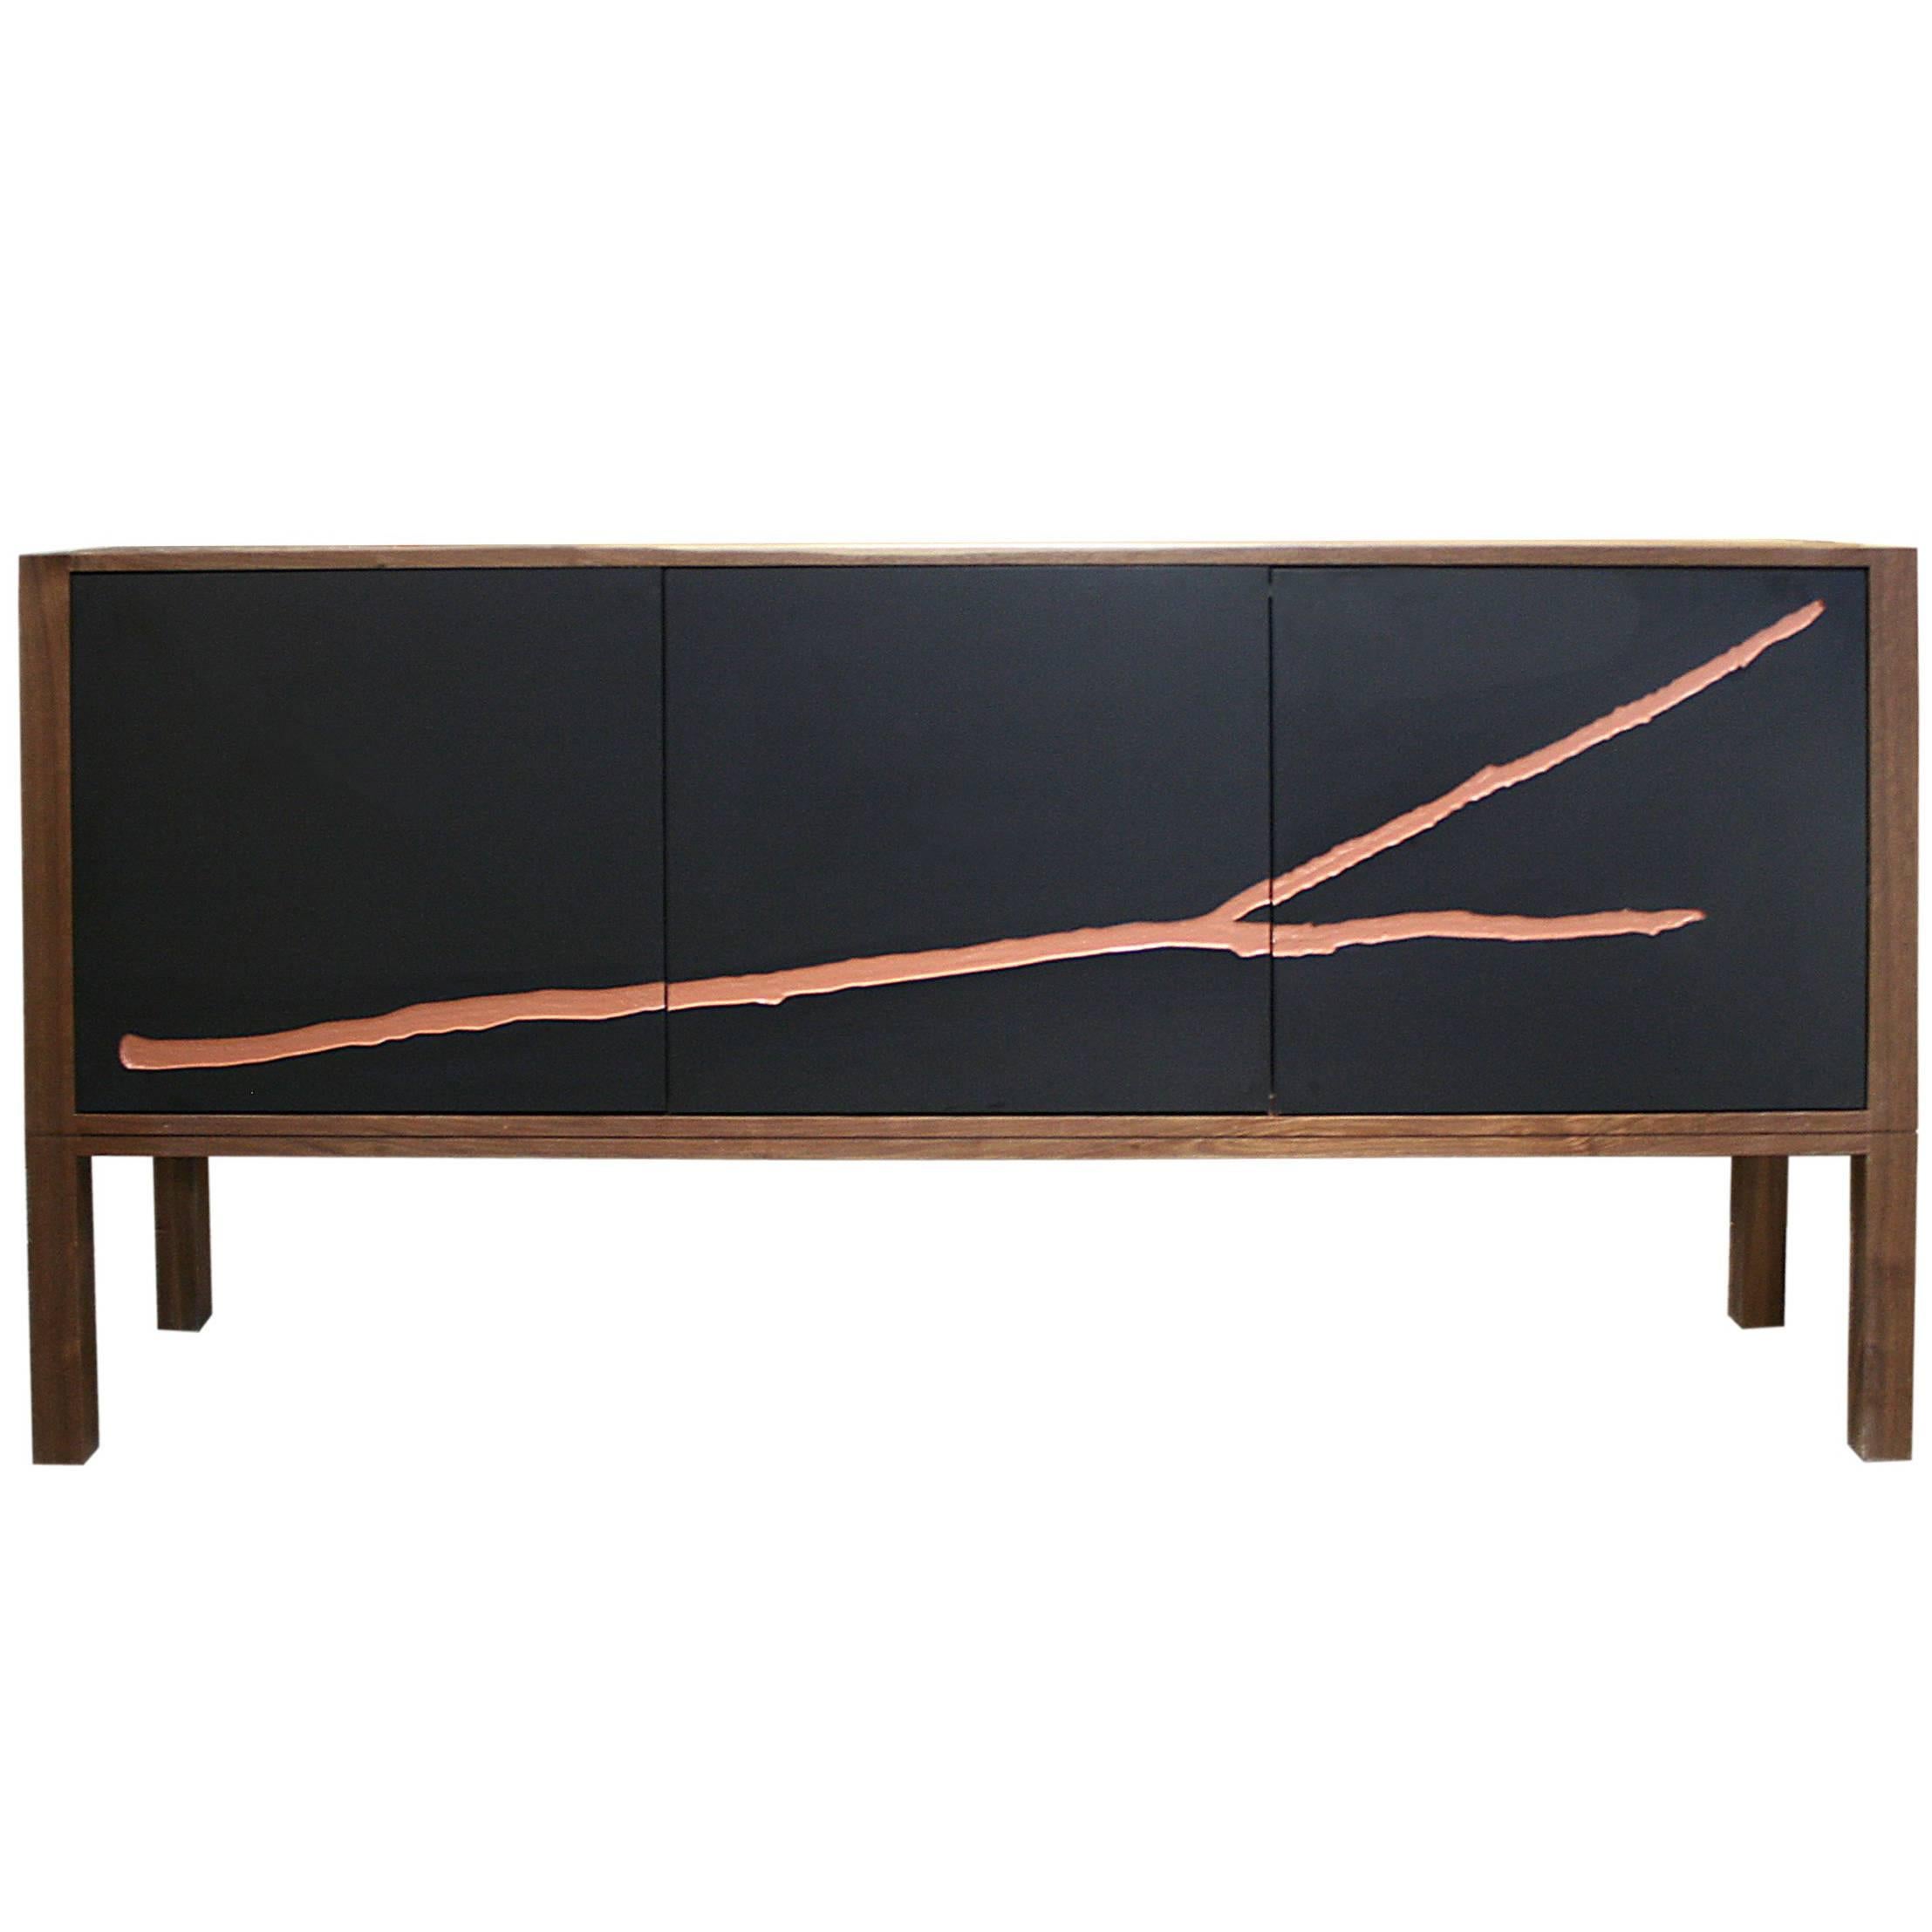 Shimna Neosho Walnut Credenza with Engraved Branch Art For Sale